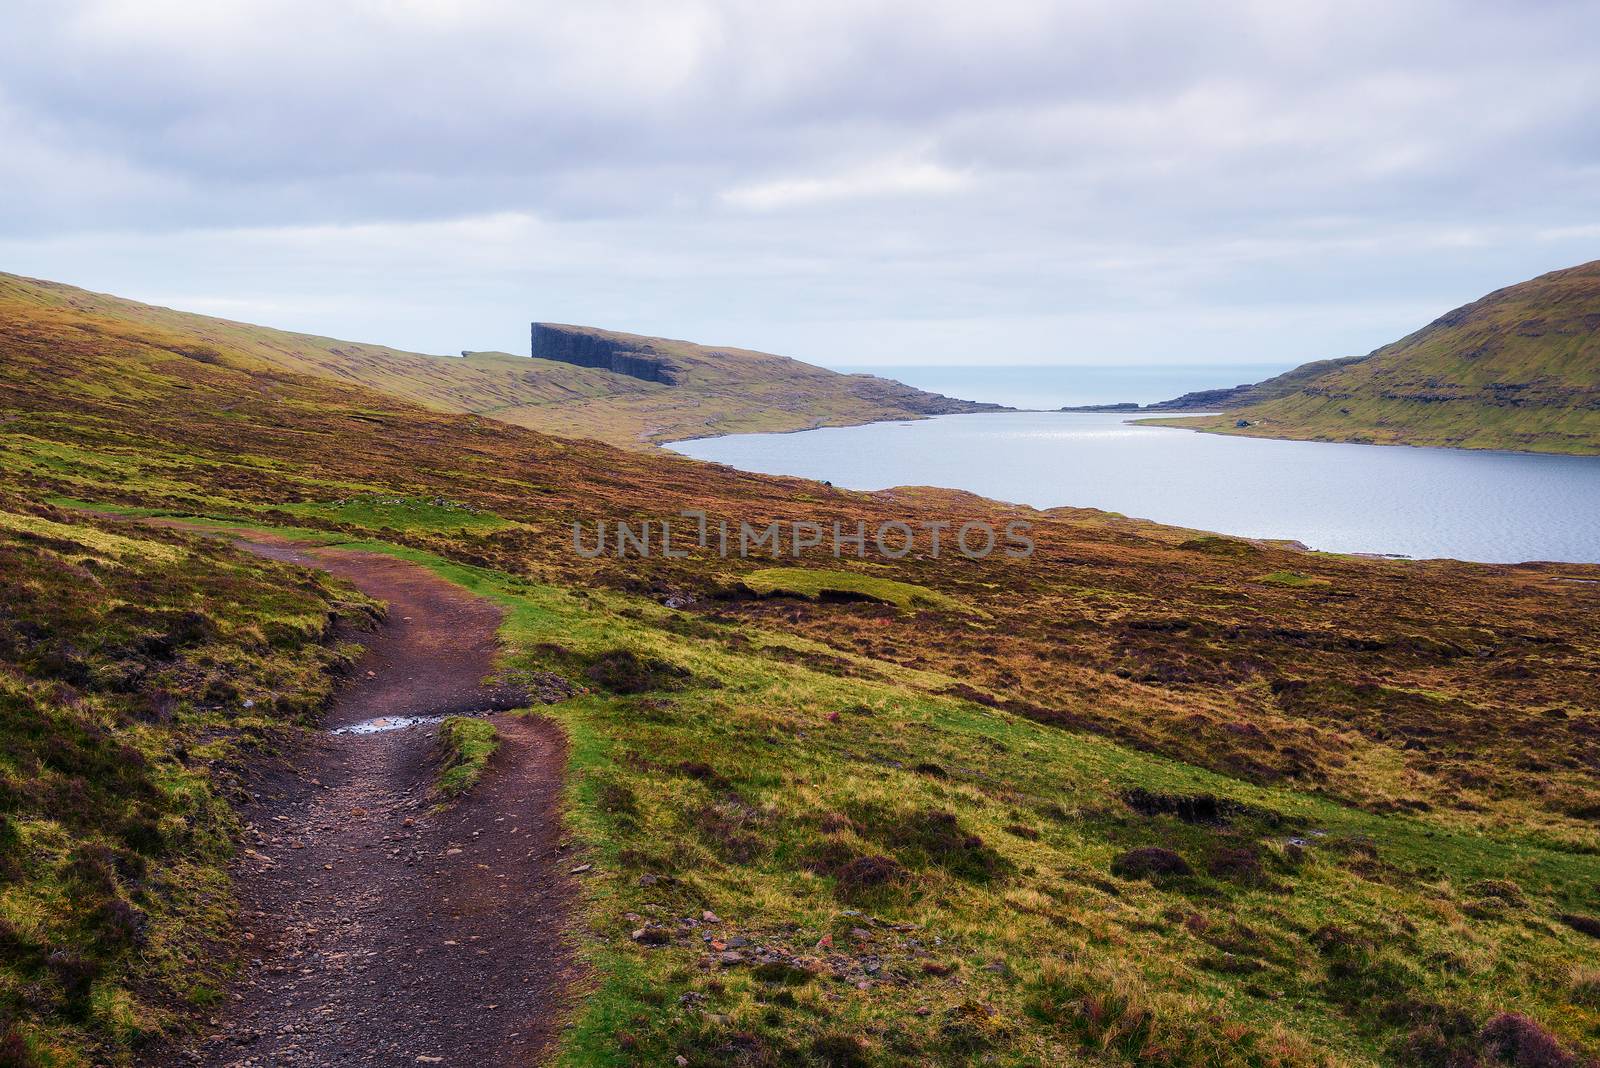 Footpath to cliff Traelanipan and lake Sorvagsvatn located on the island of Vagar. Leitisvatn or Sorvagsvatn is the largest lake in the Faroe Islands, Denmark.